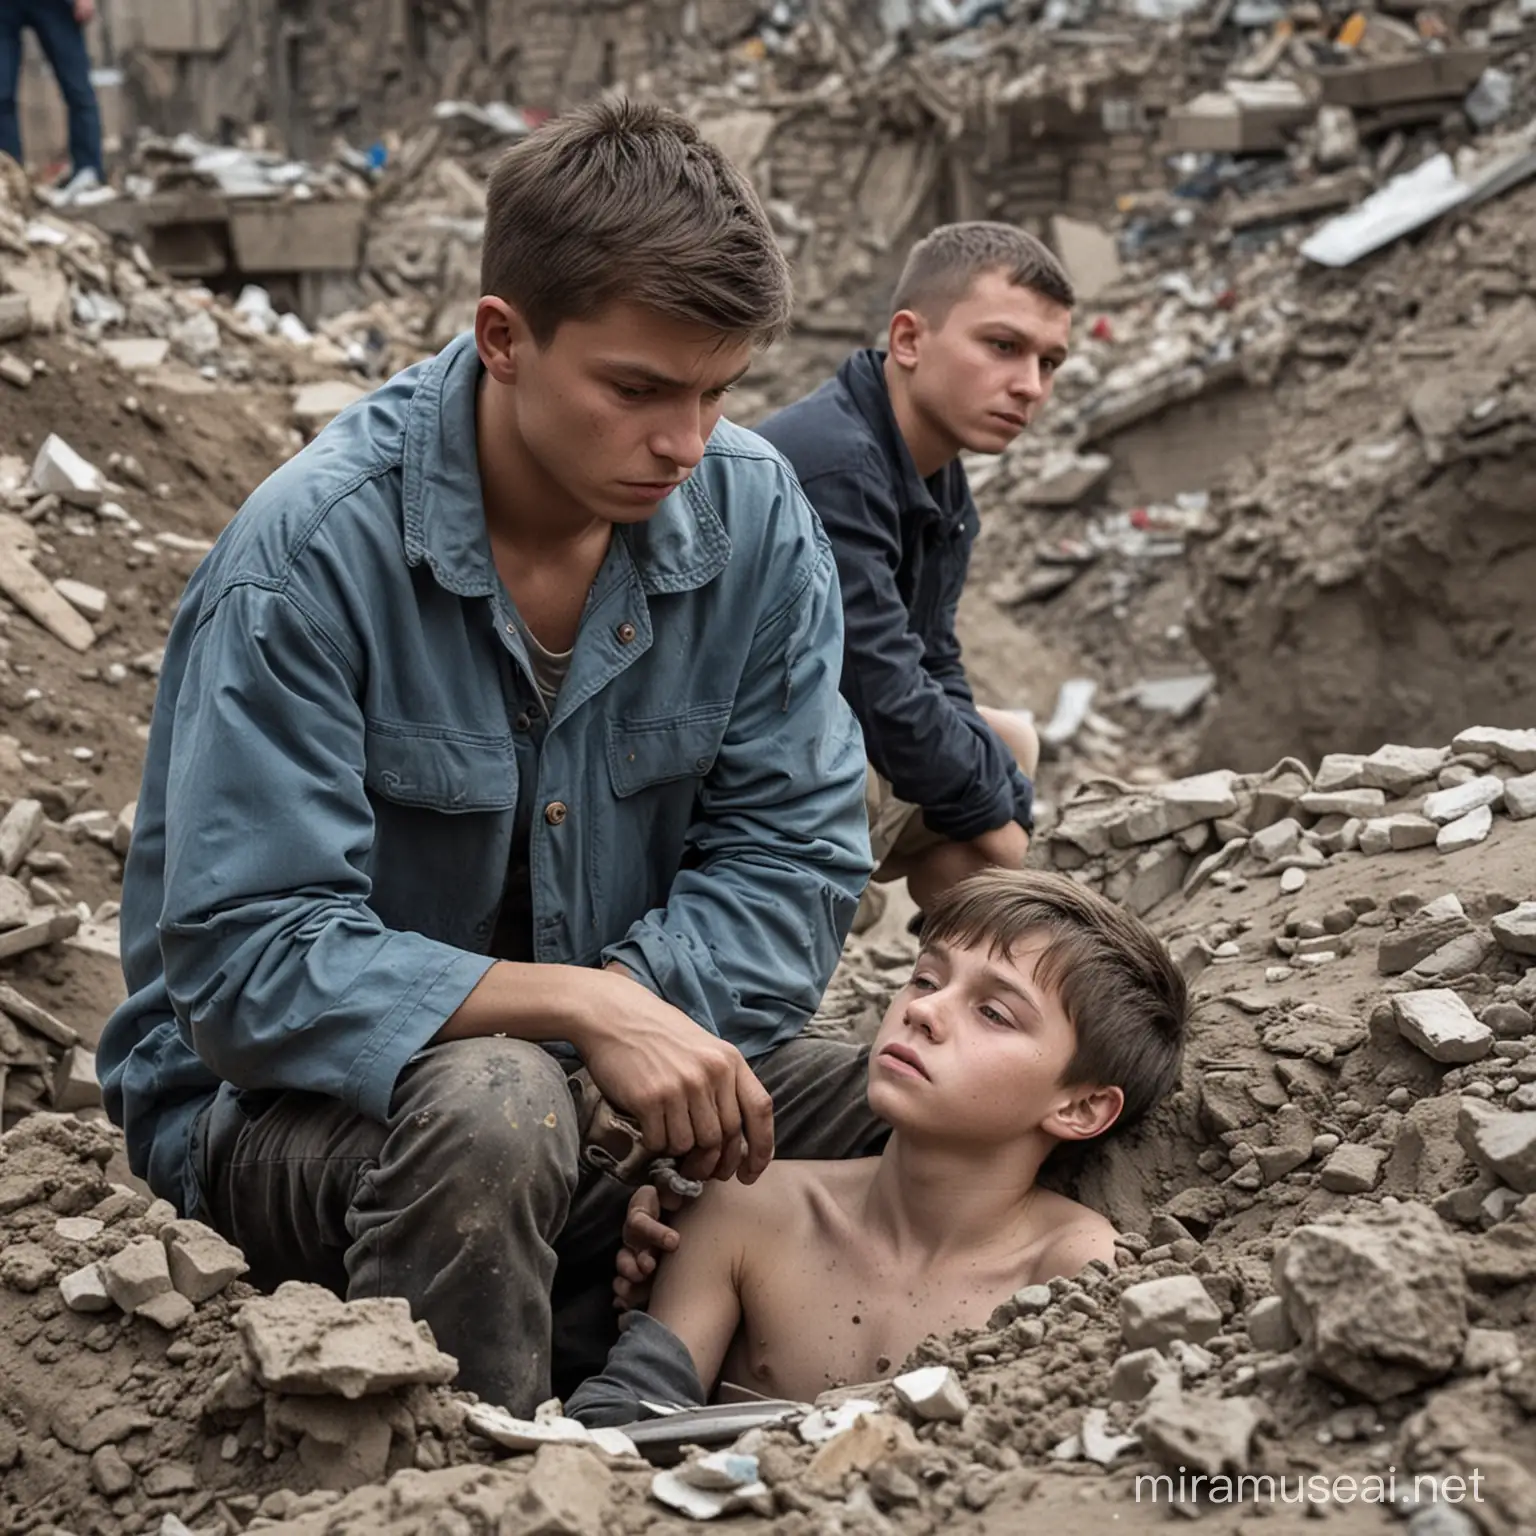 a fully clothed quiet unemotional 19 year old Ukrainian boy finds his younger 8 year old brother buried in the rubble covering the bathtub 